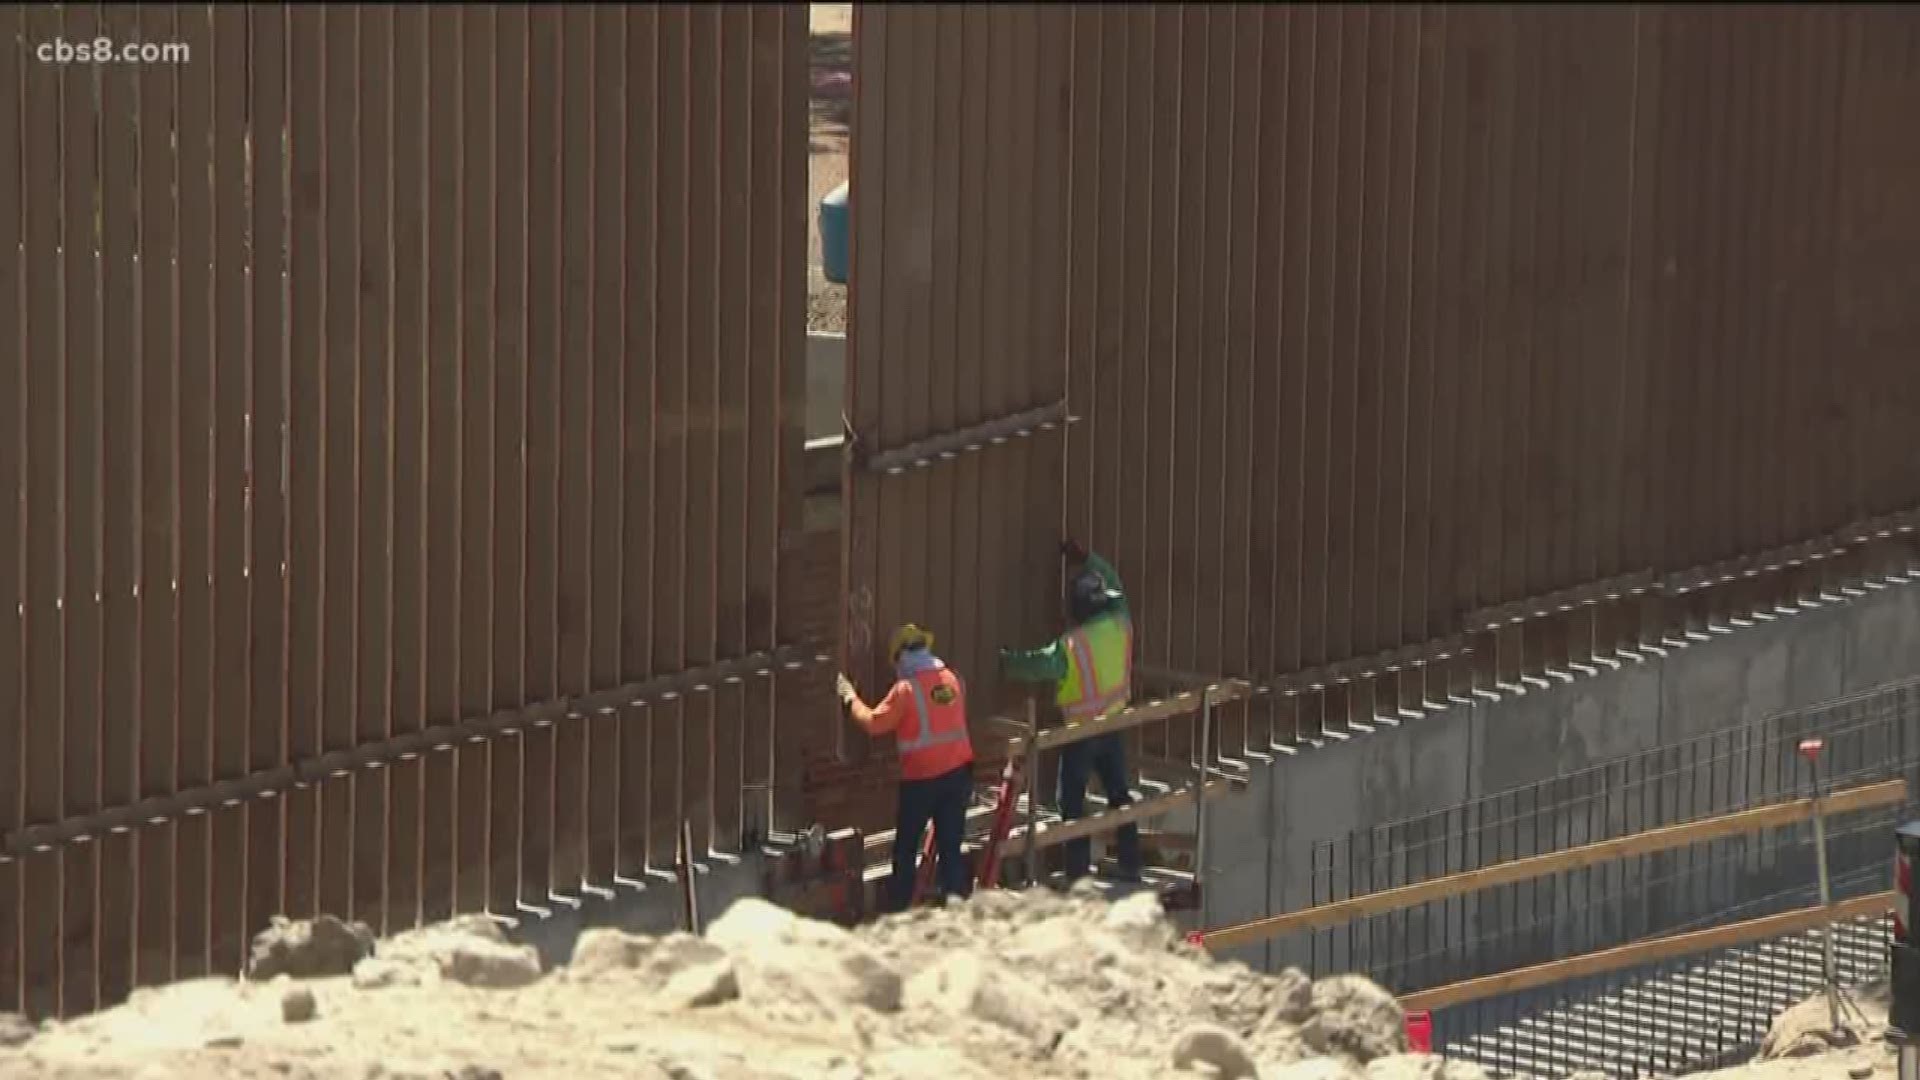 The border wall in Otay Mesa was completed on Friday as crews installed the final panel of that section. The section of fencing stretches from near the Pacific Ocean to Otay Mountain and is double the height of the old fencing.